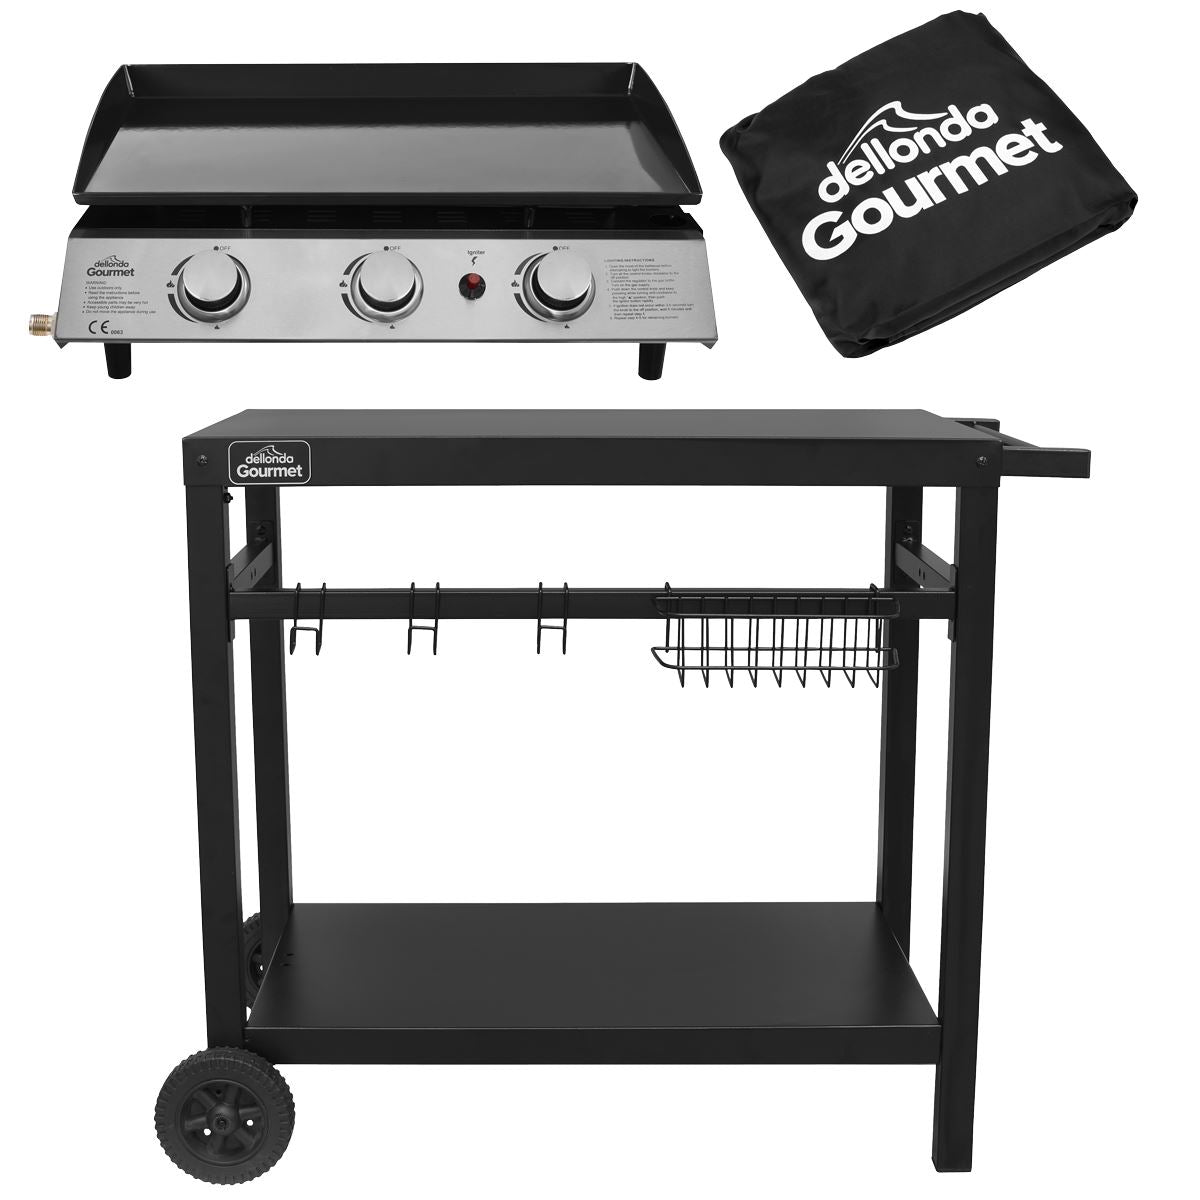 Dellonda 3 Burner Portable Gas Plancha 7.5kW BBQ Griddle, Stainless Steel, Supplied with Water Resistant Cover & Trolley